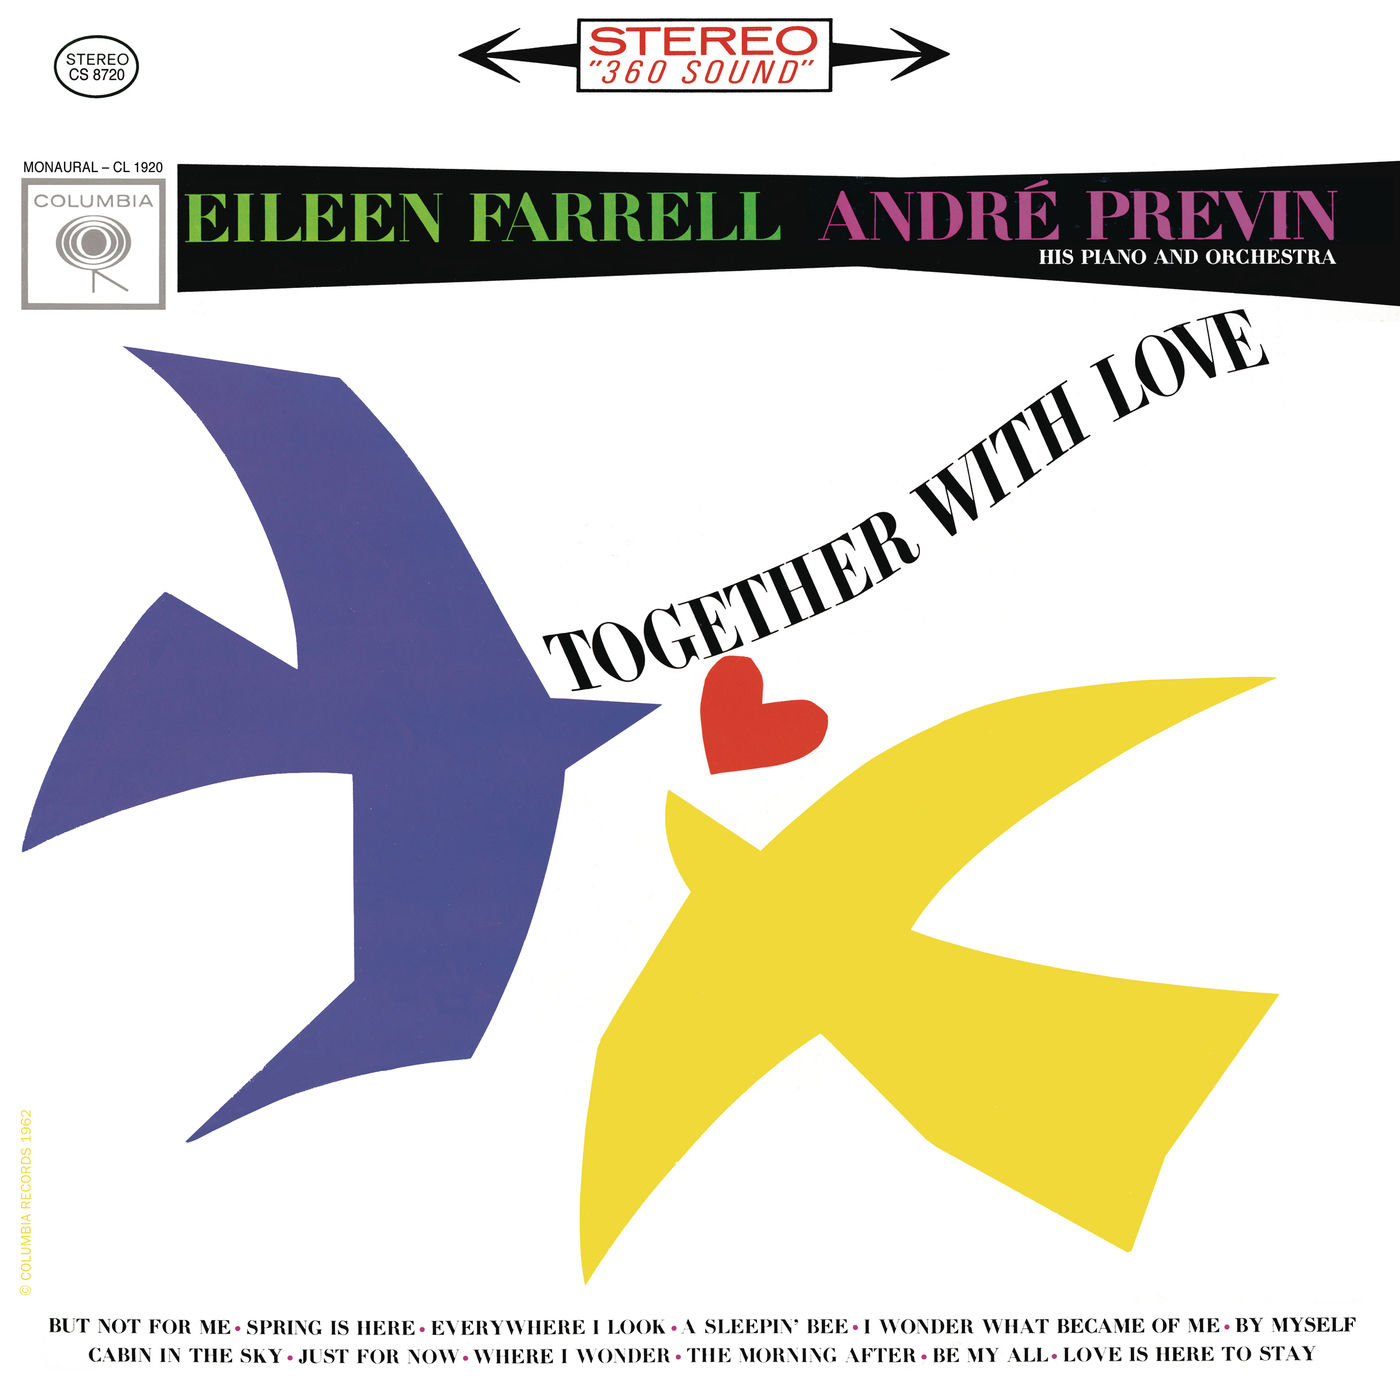 Eileen Farrell - Together with Love (Remastered) (2020) [FLAC 24bit/96kHz]